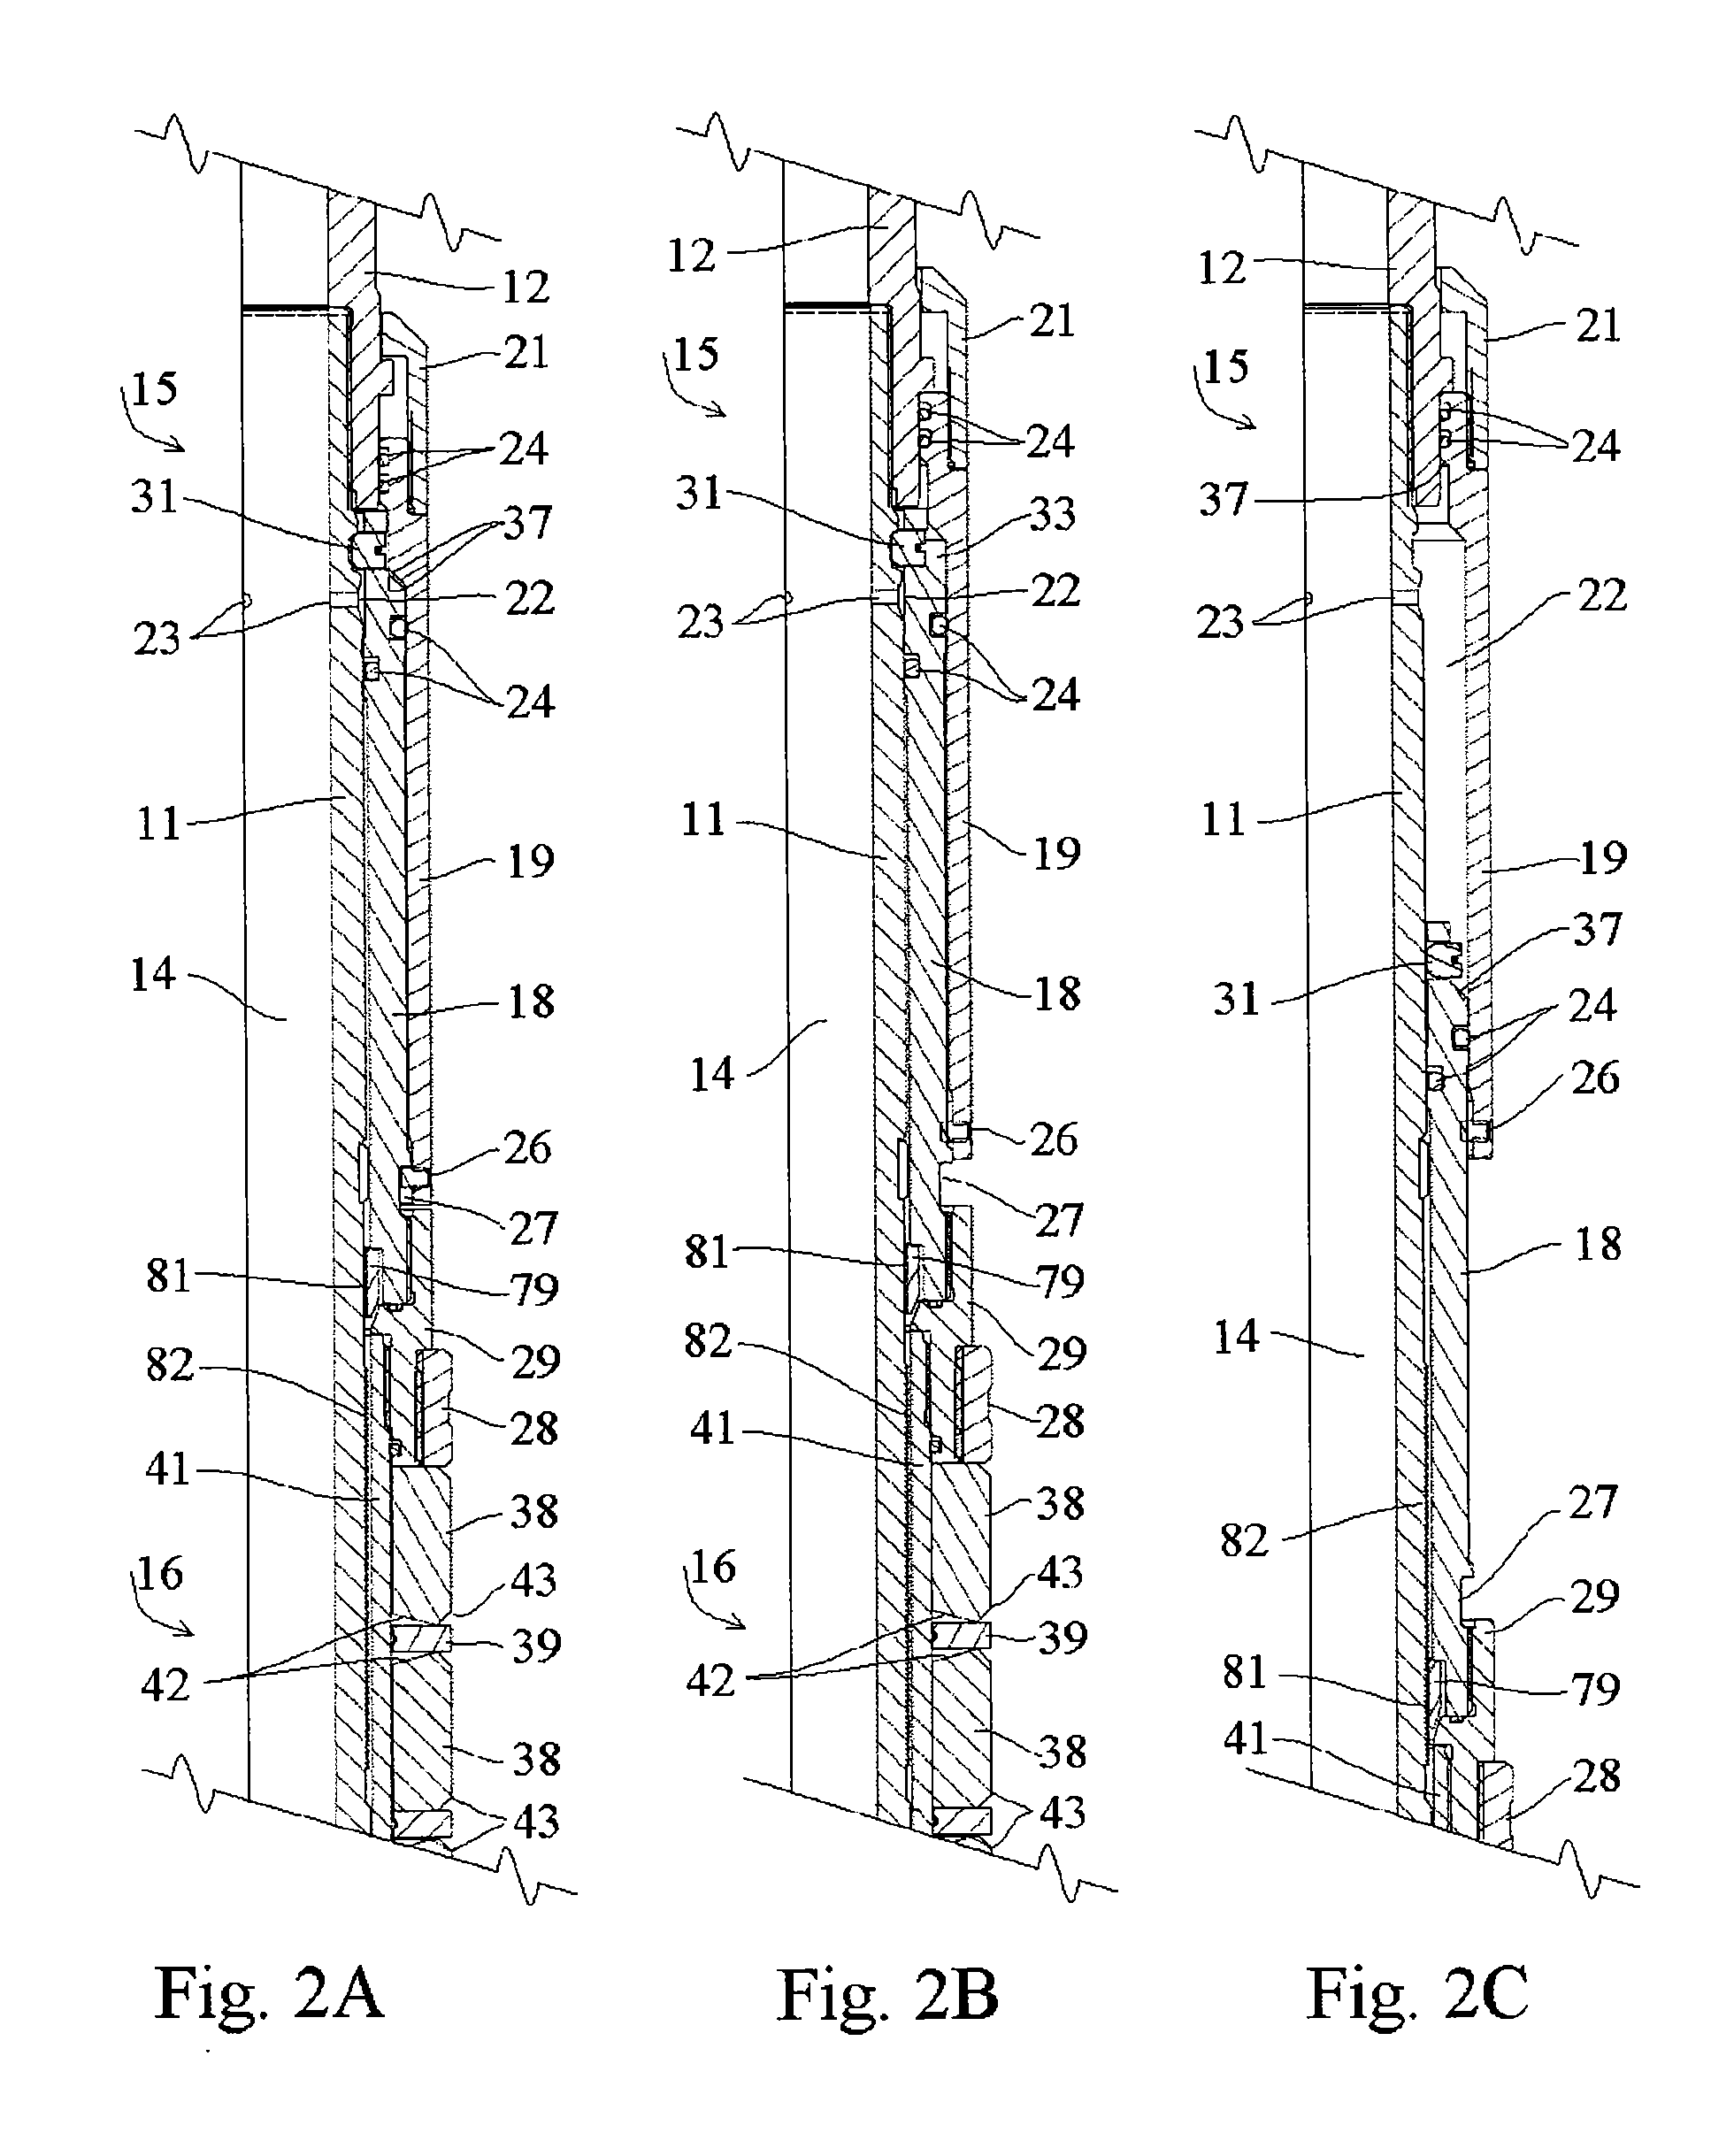 Downhole packer tool with safety systems for preventing undue set and release operations